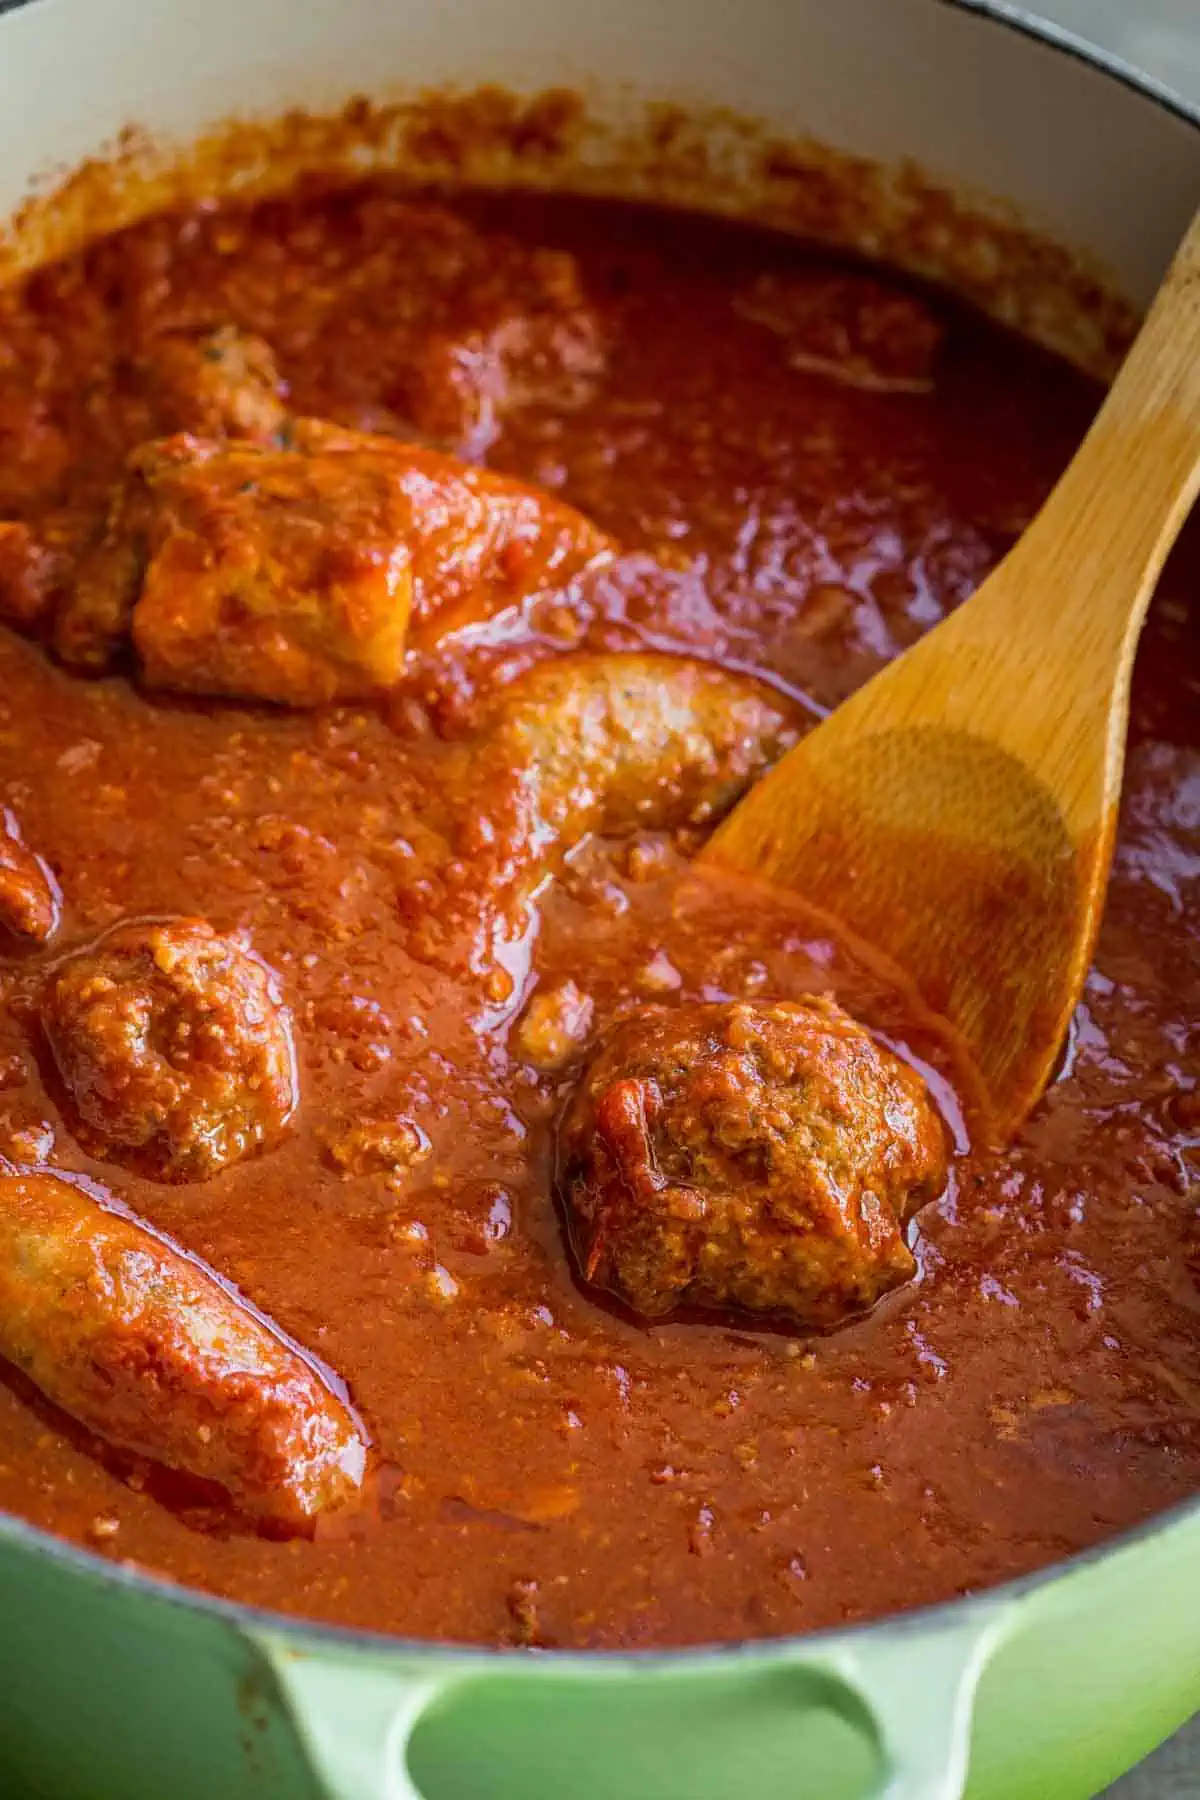 A wooden spoon lifting a meatball out of a pot of Italian red gravy.